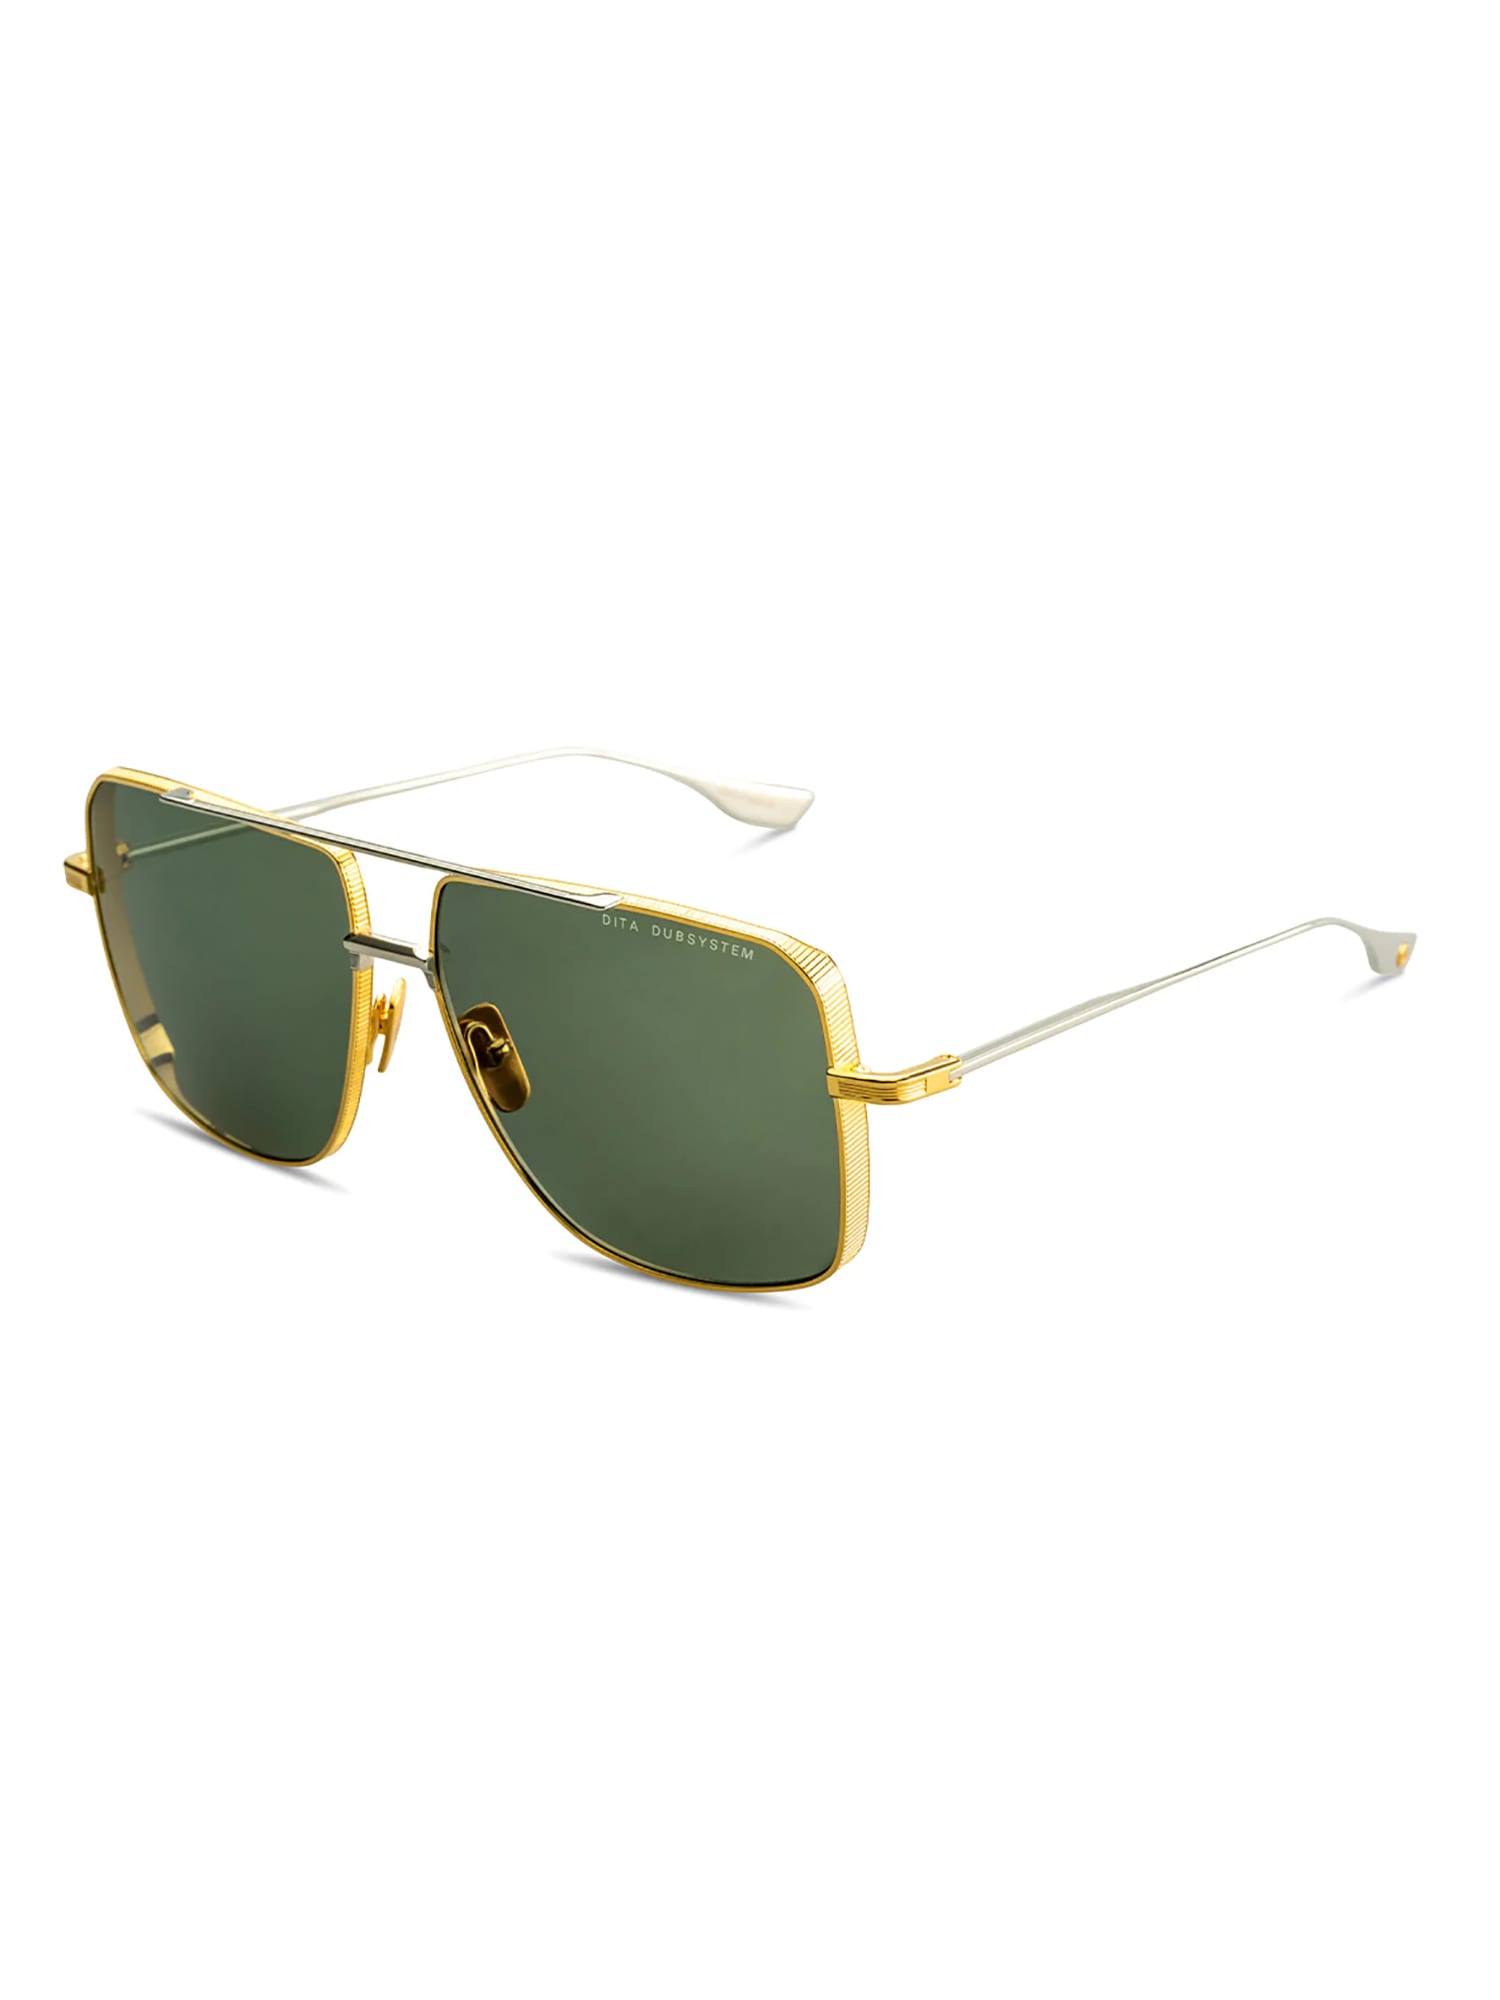 Shop Dita Dts157/a/01 Dubsystem Sunglasses In Yellow Gold